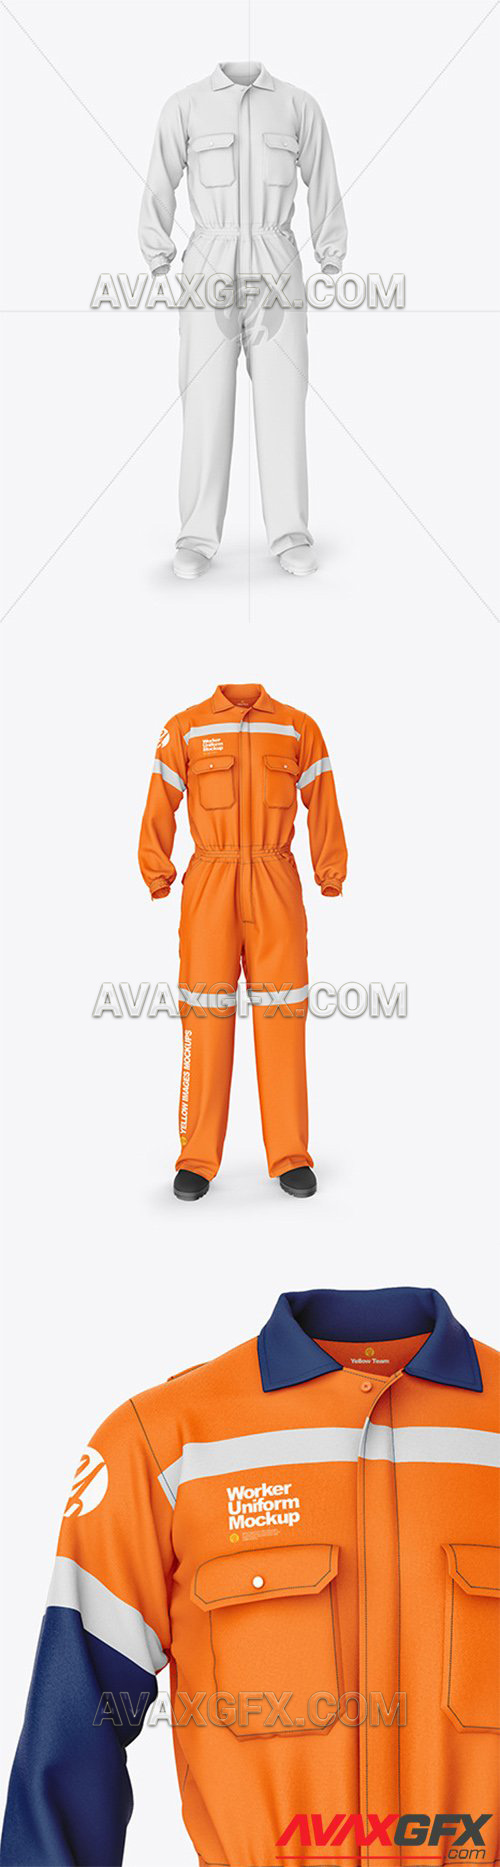 Download Worker Uniform Mockup - Front View 57159 » AVAXGFX - All ...